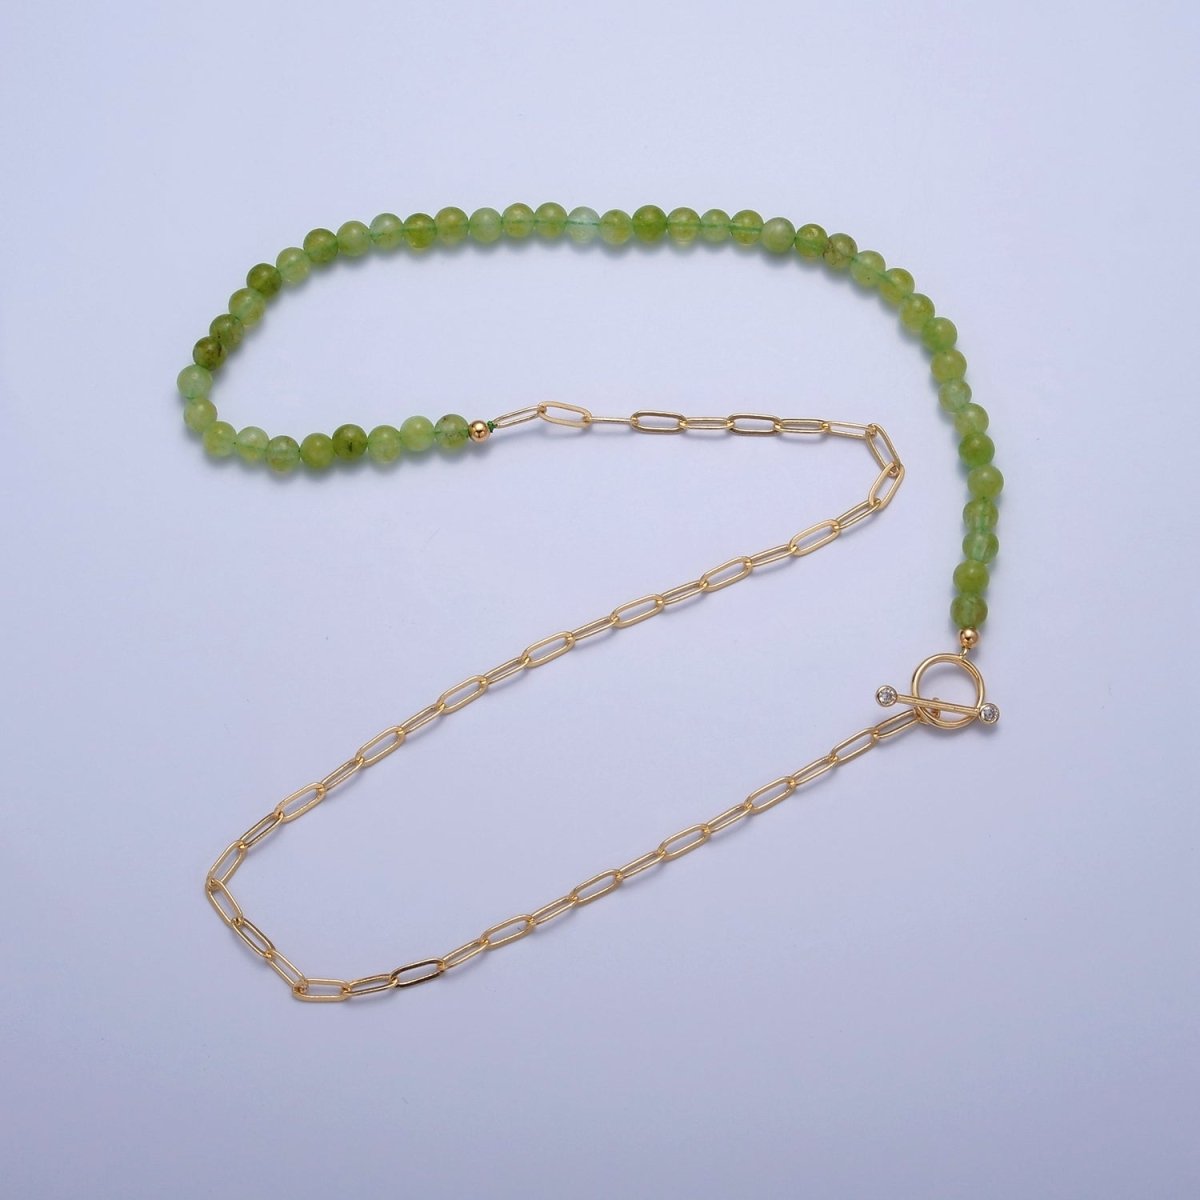 Dainty Half Bead Half Link Chain Necklace, 24k Gold Filled Paperclip Chain with Green Jade Necklace Toggle Clasp | WA-960 Clearance Pricing - DLUXCA